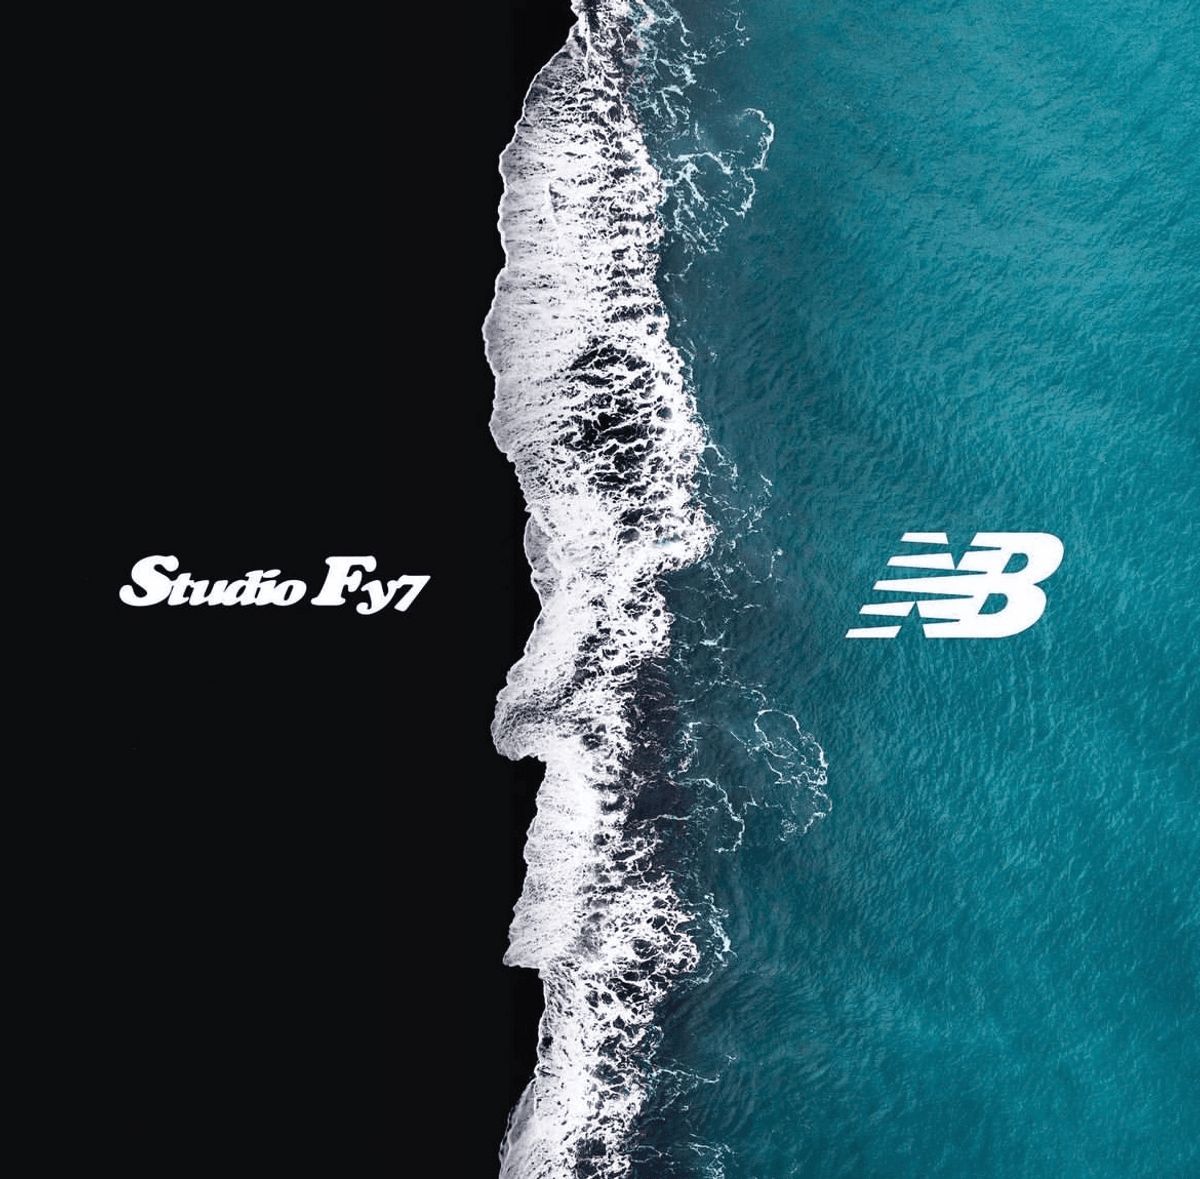 Studio Fy7 Announces A Collaboration With New Balance Slated For Summer 2023